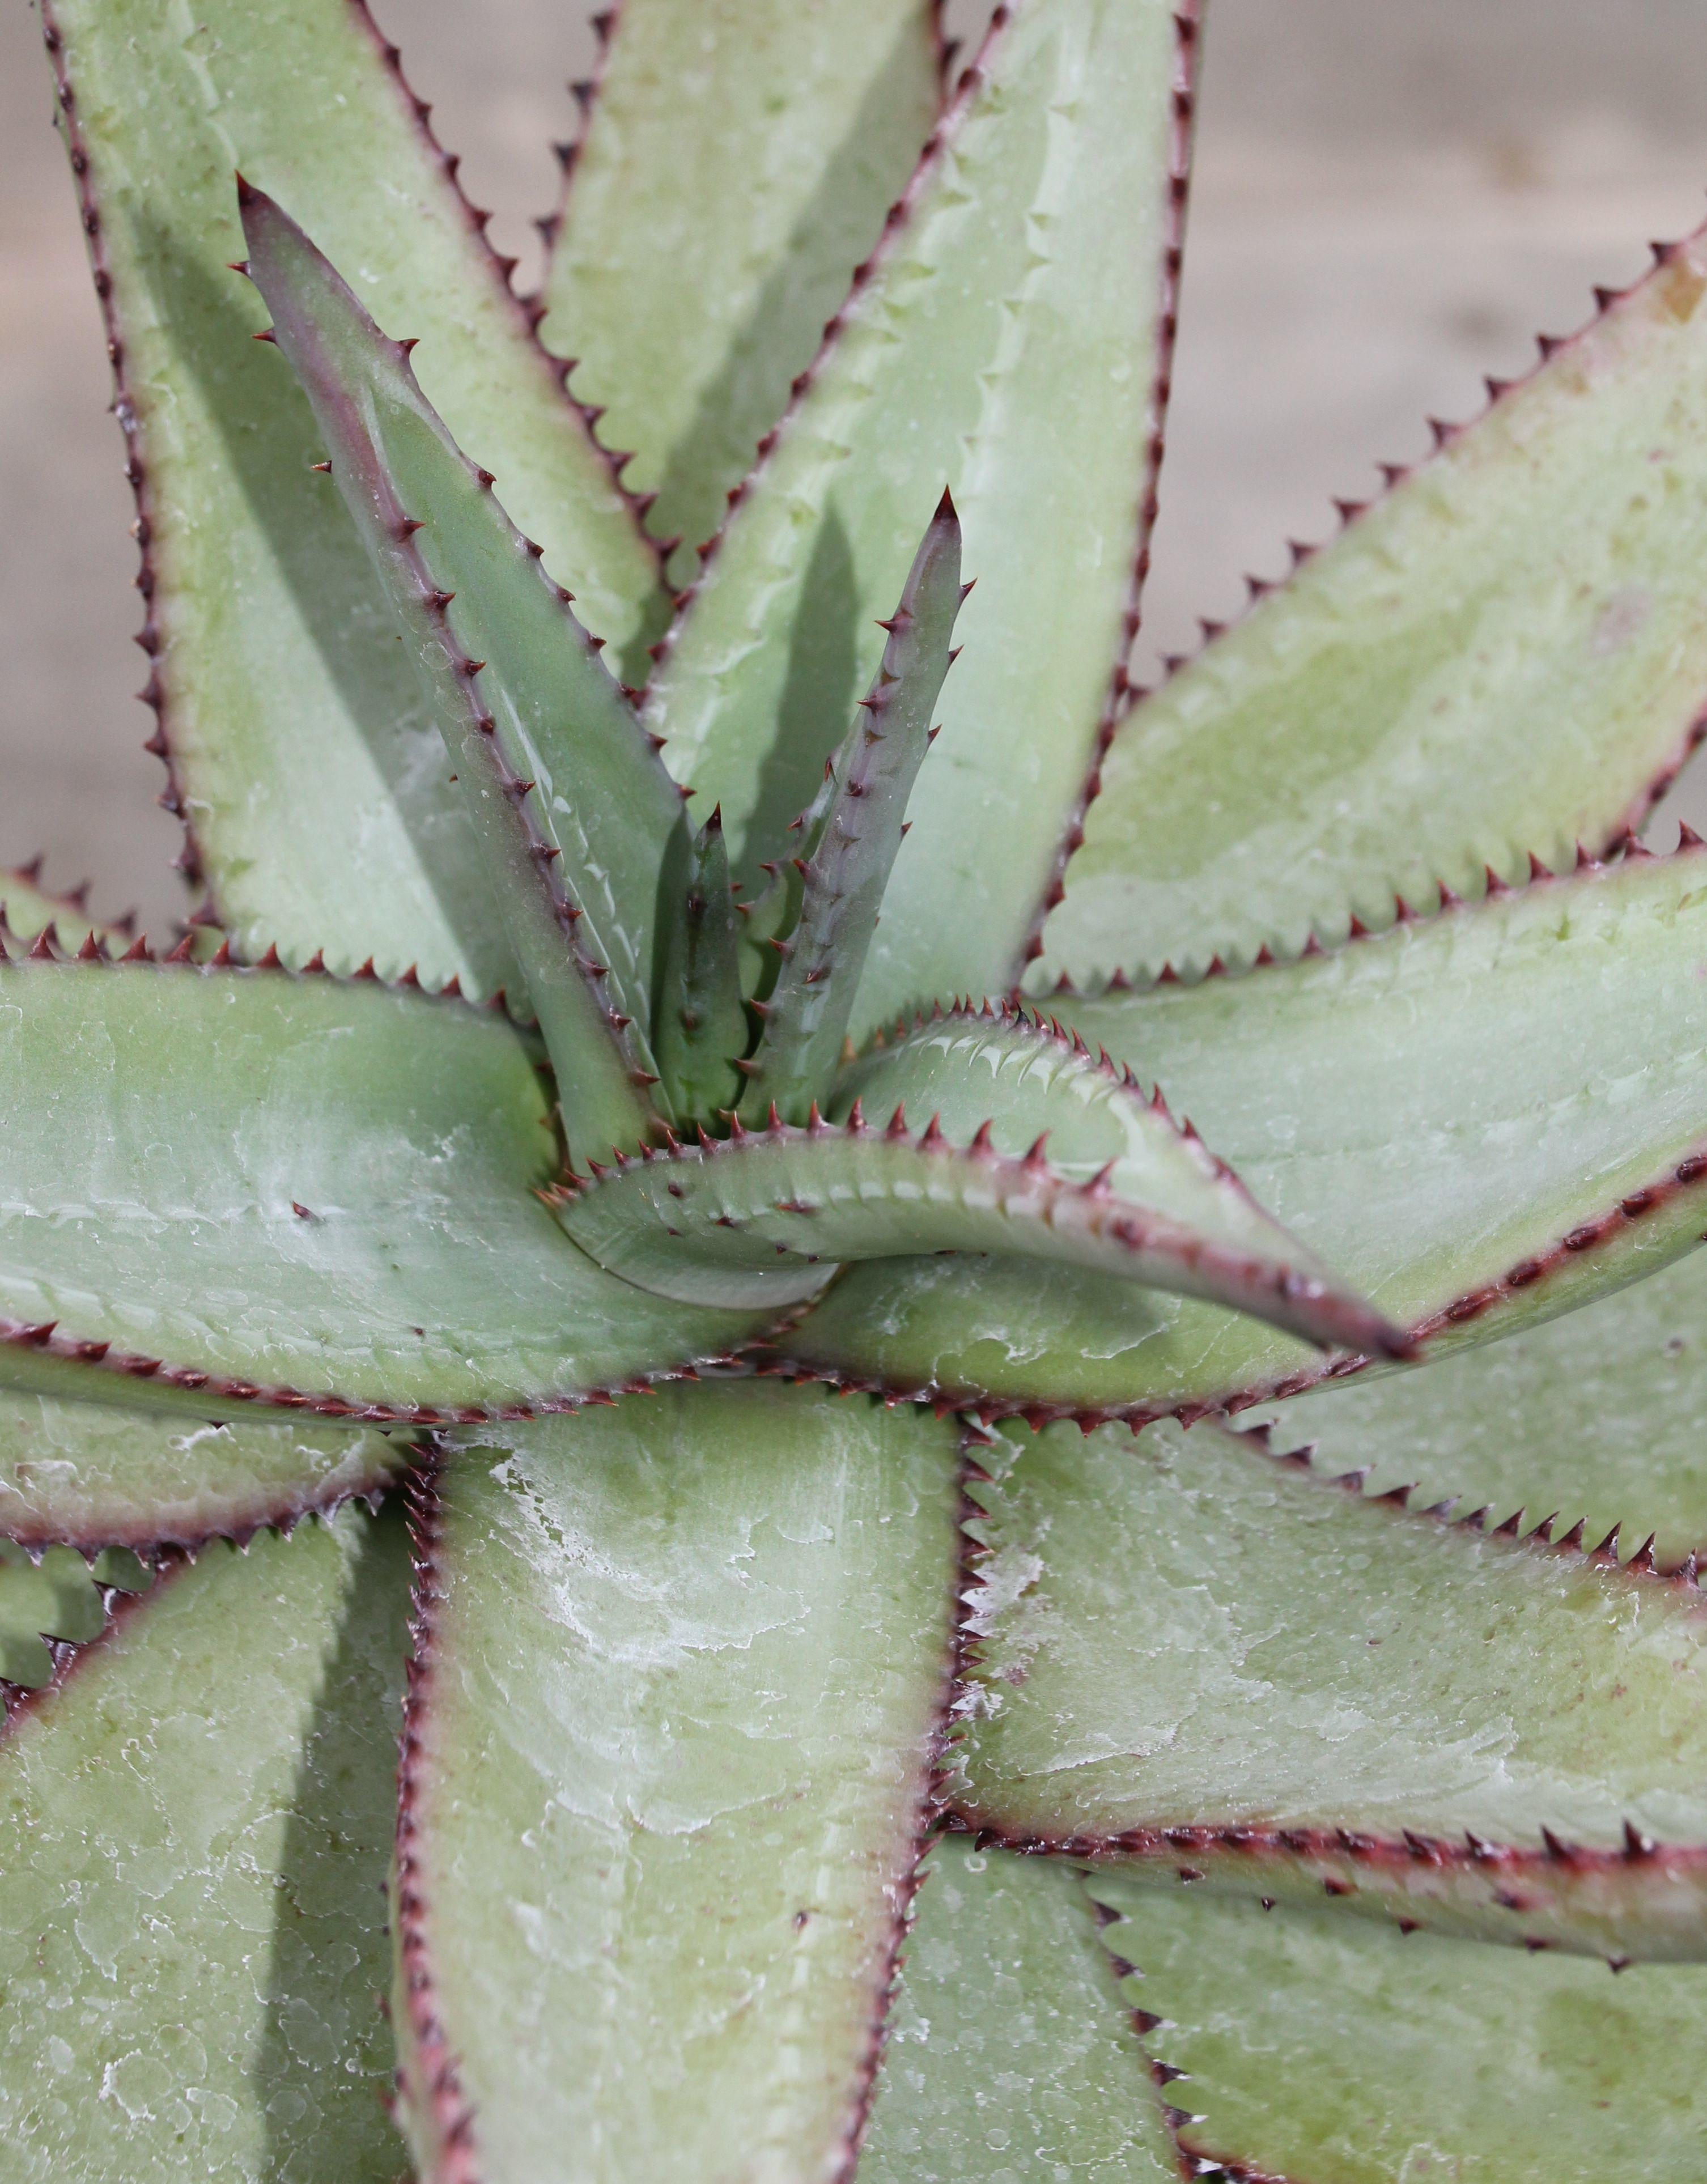 Green ferocious aloe plant with large with purple spines along the edges